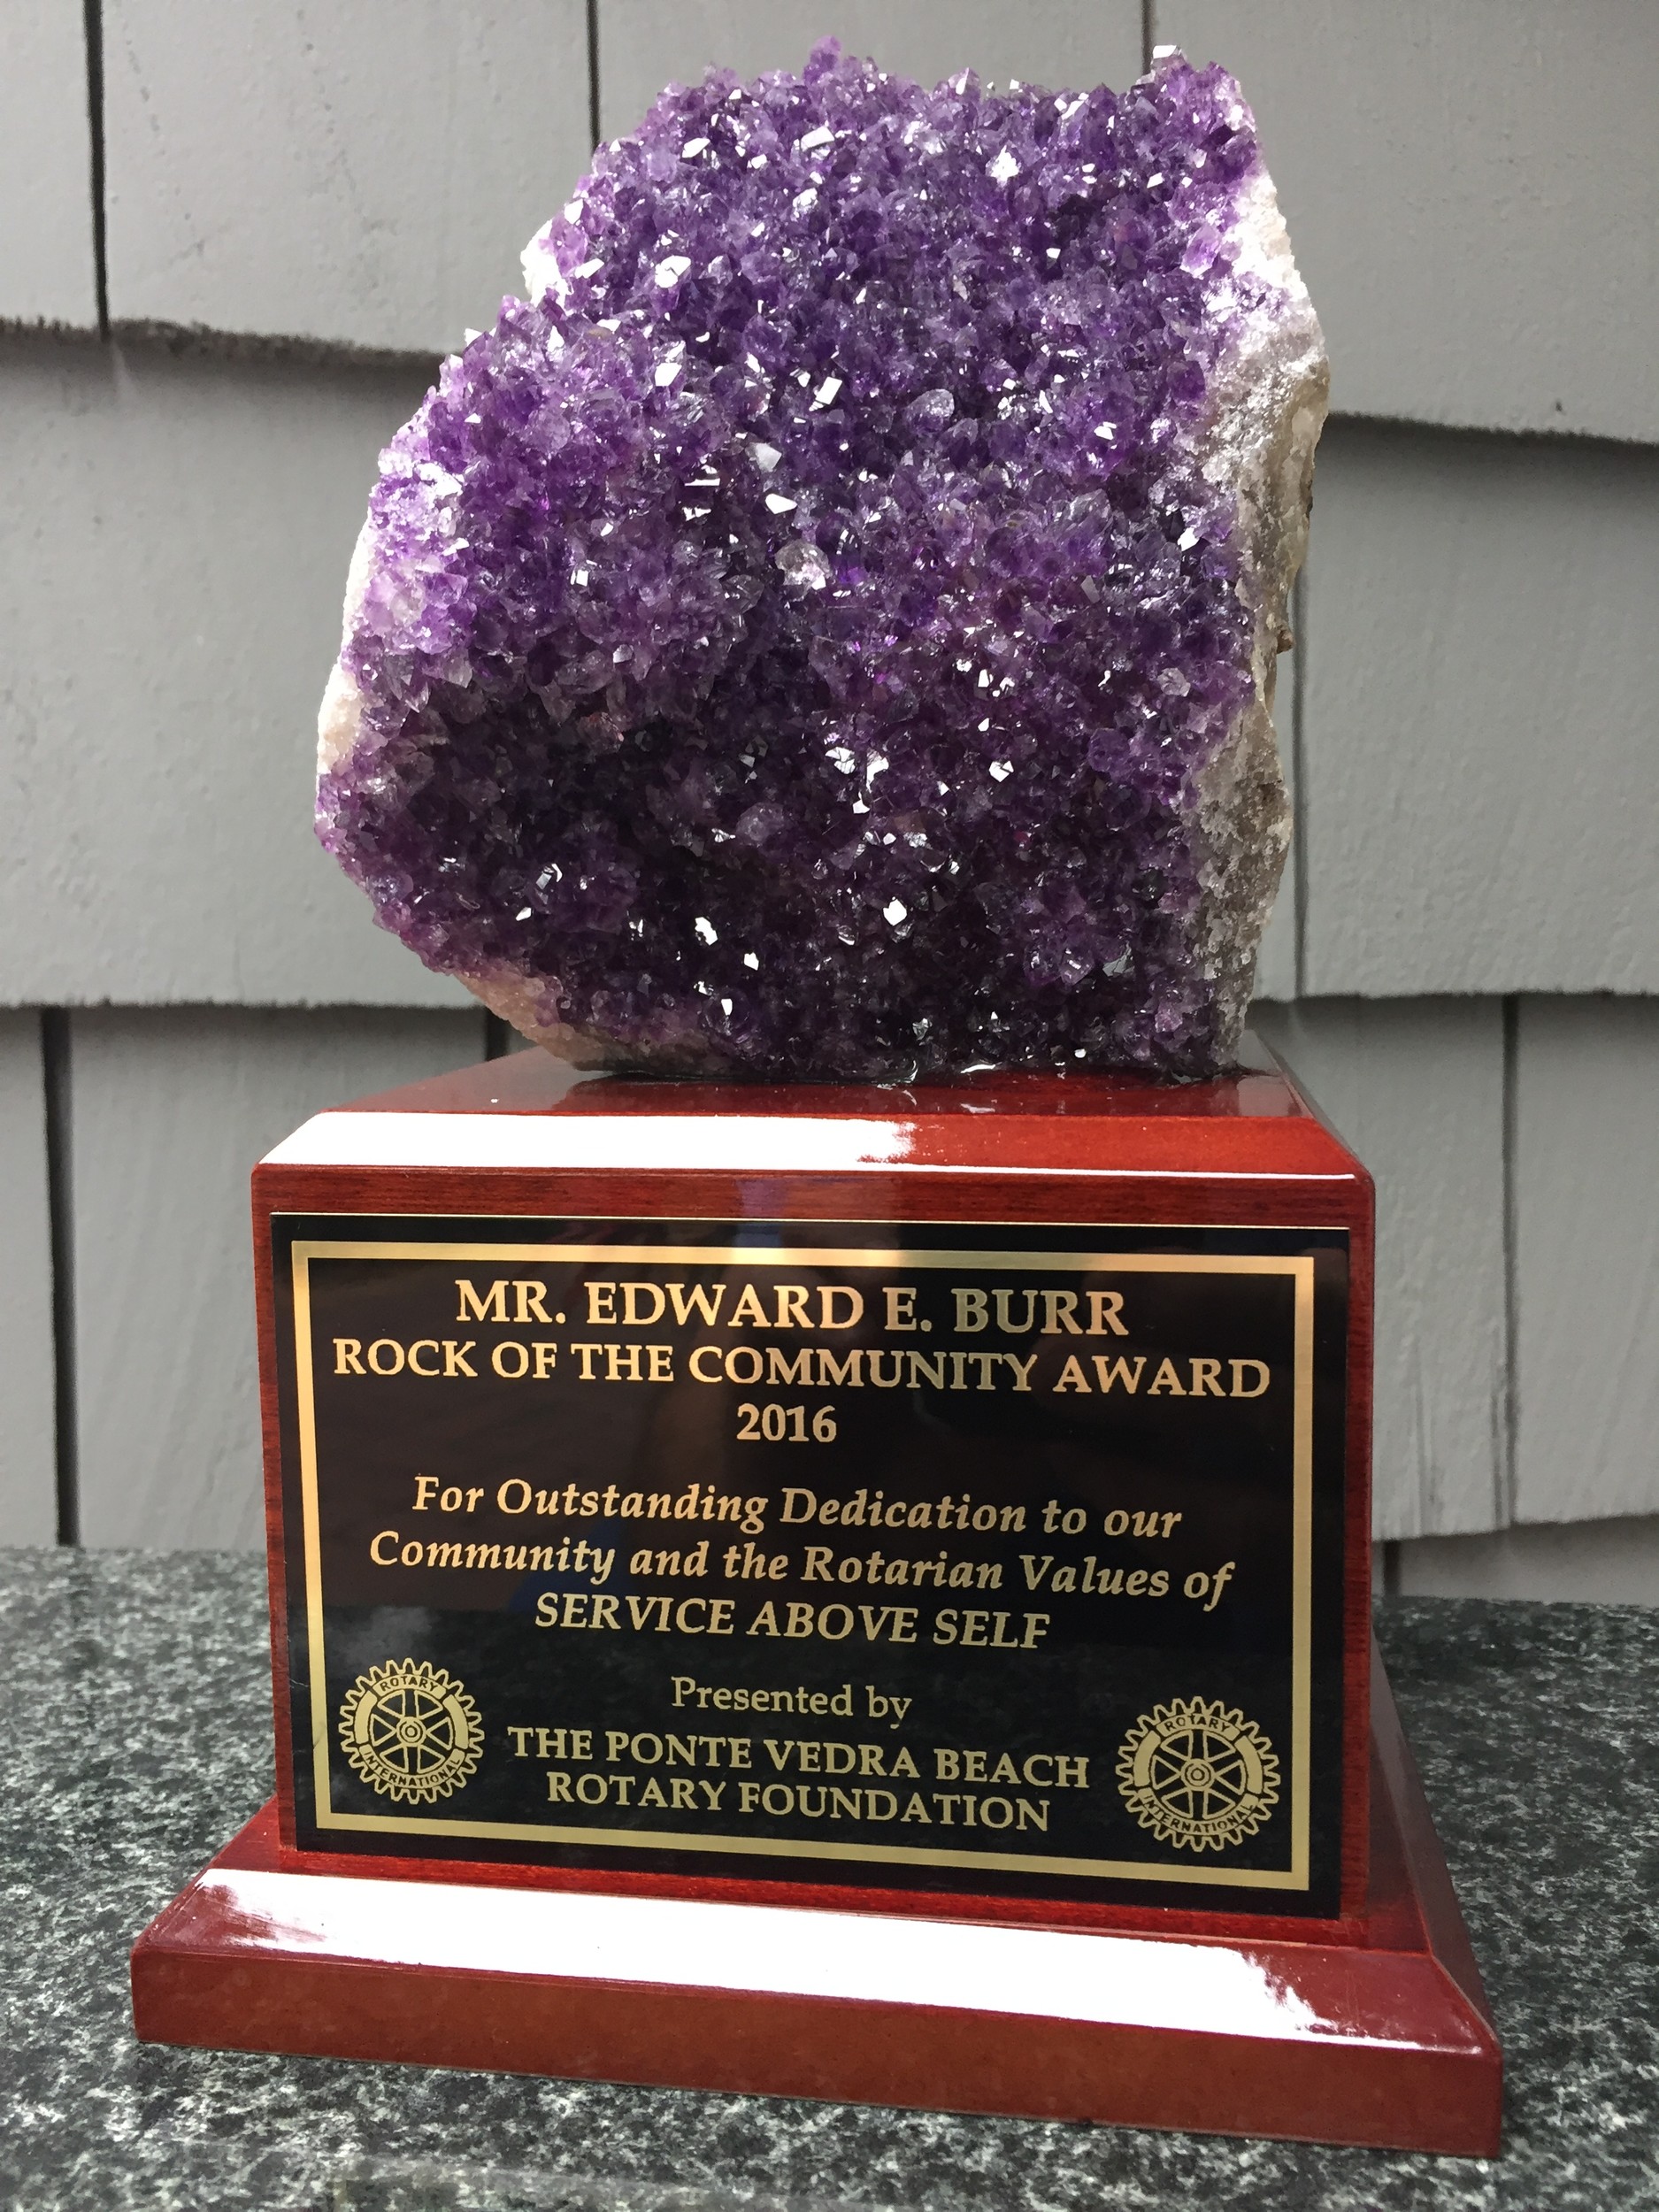 Award given to Ed Burr, honoree of the evening, for his achievements in civic leadership.